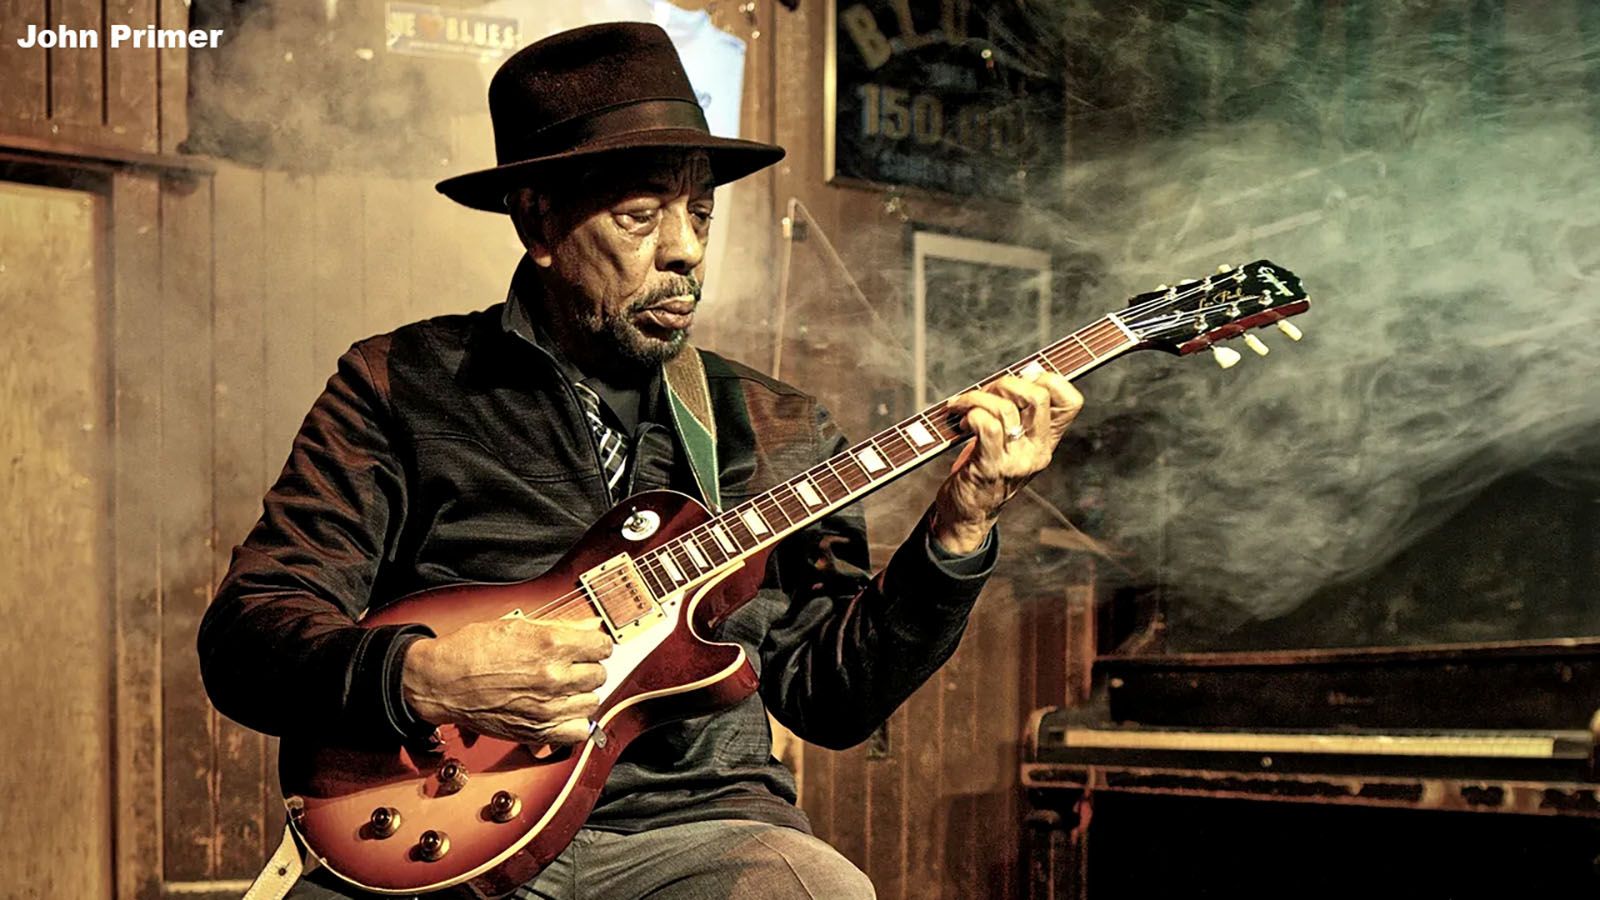 John Primer & The Real Deal Blues Band out of Chicago will headline Day 2 of the Botanical Roots Music Fest at Foellinger-Freimann Botanical Conservatory, Aug. 2-3.